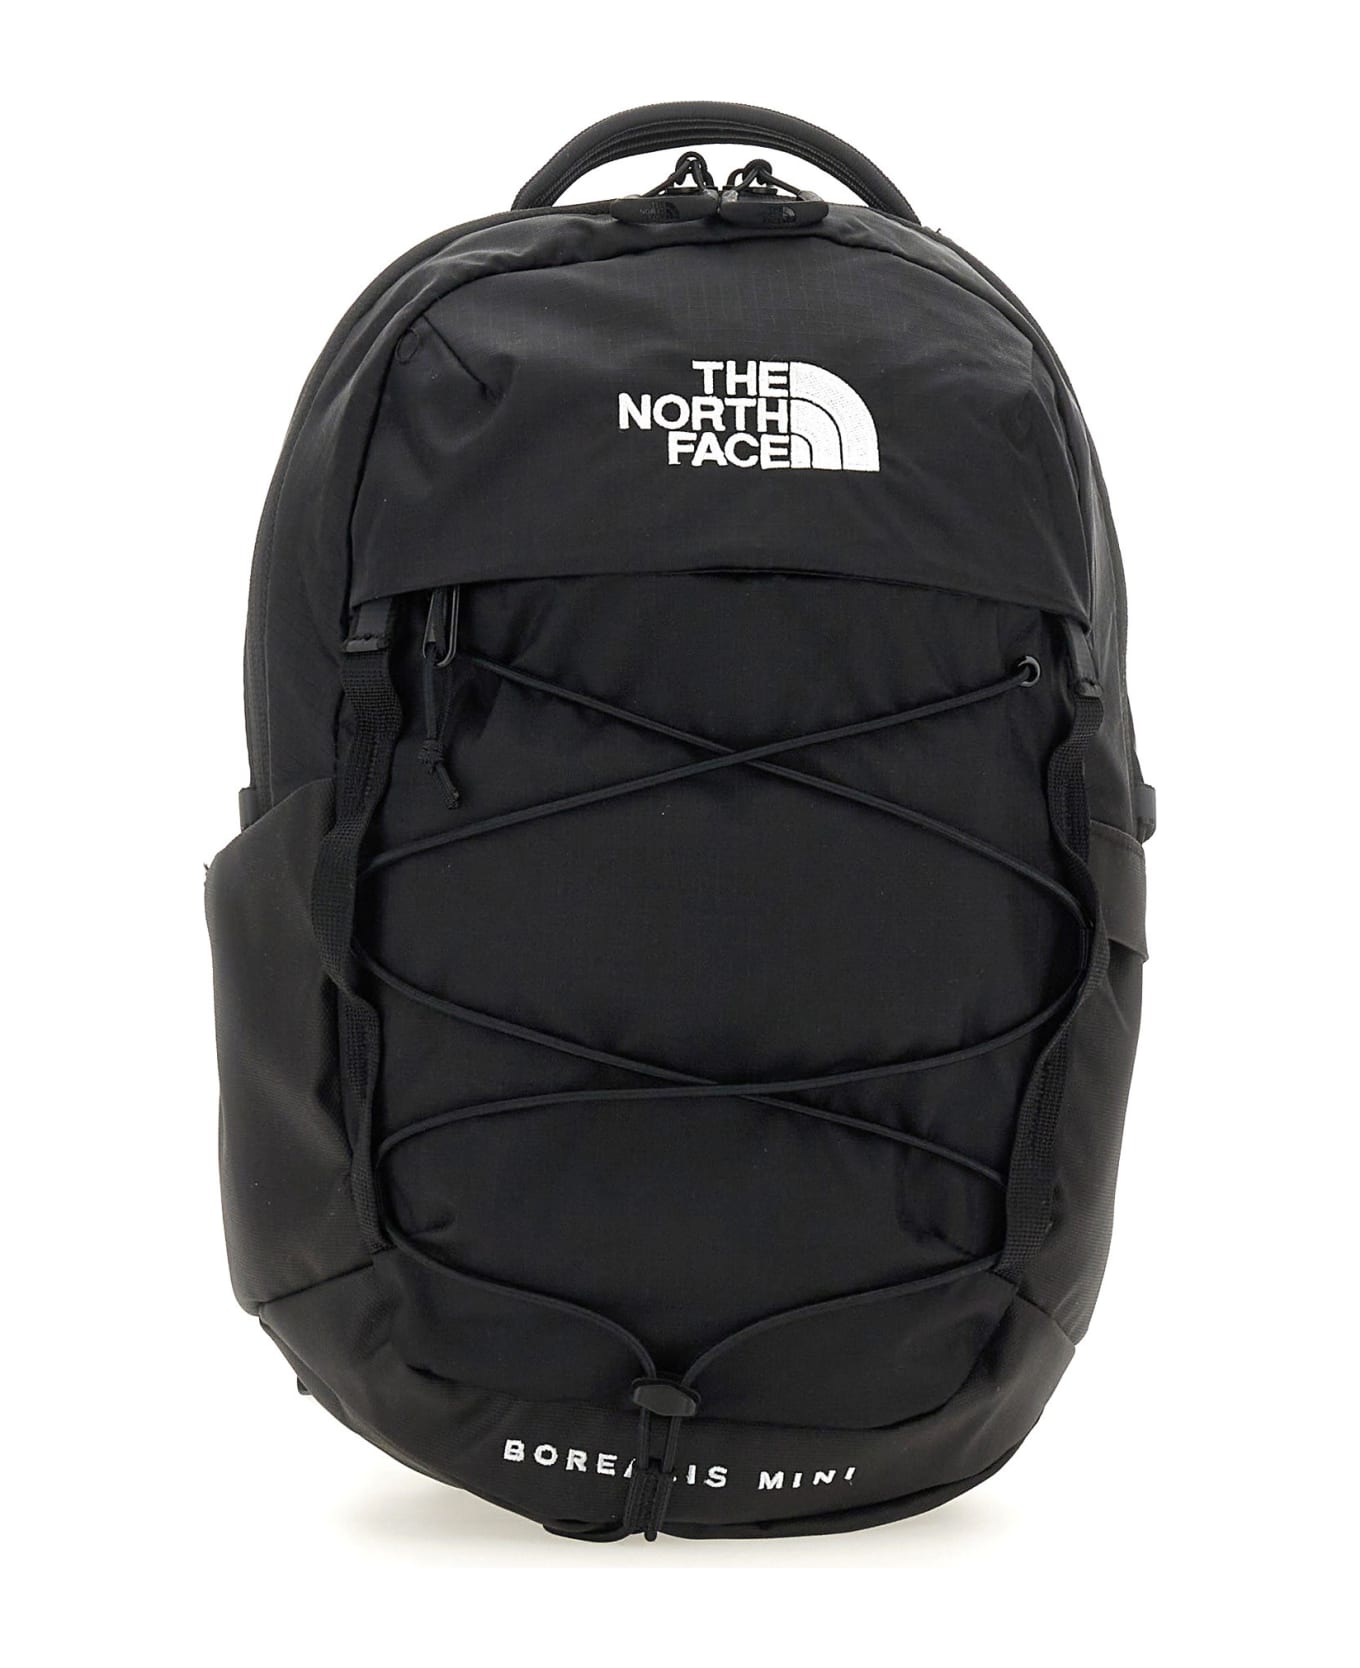 The North Face Mini Backpack With Logo - Black バックパック